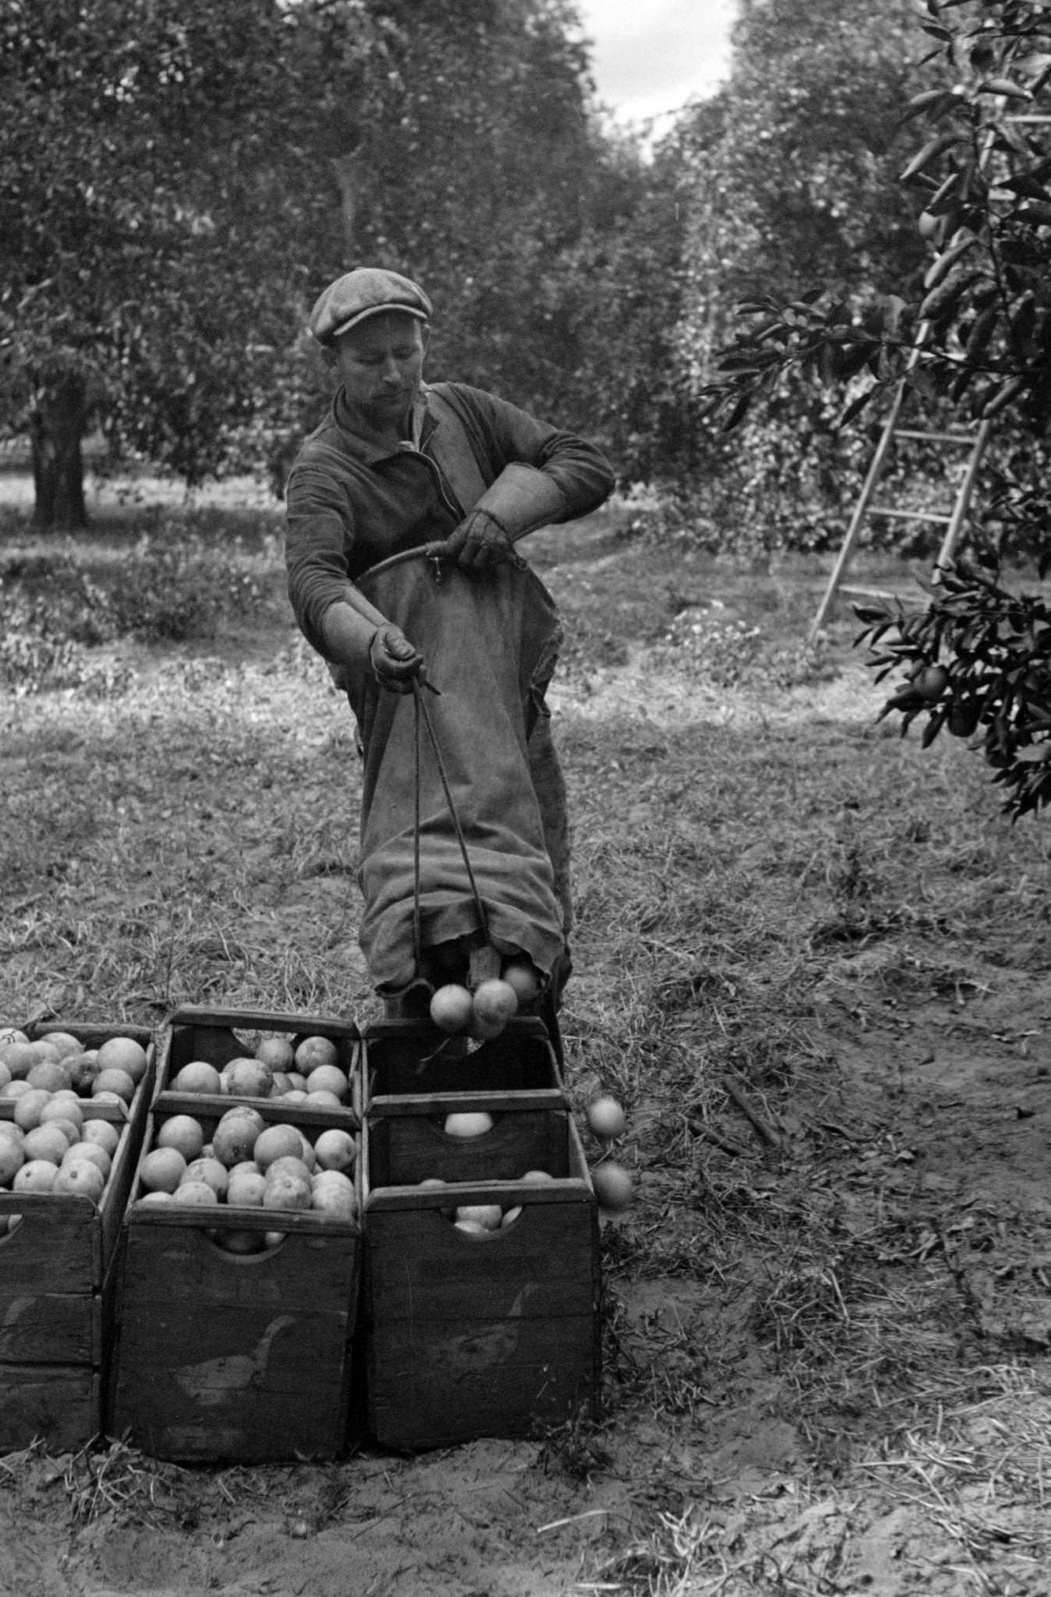 A Florida orange picker. Many of these workers are migrants, Polk County, Florida, 1930s